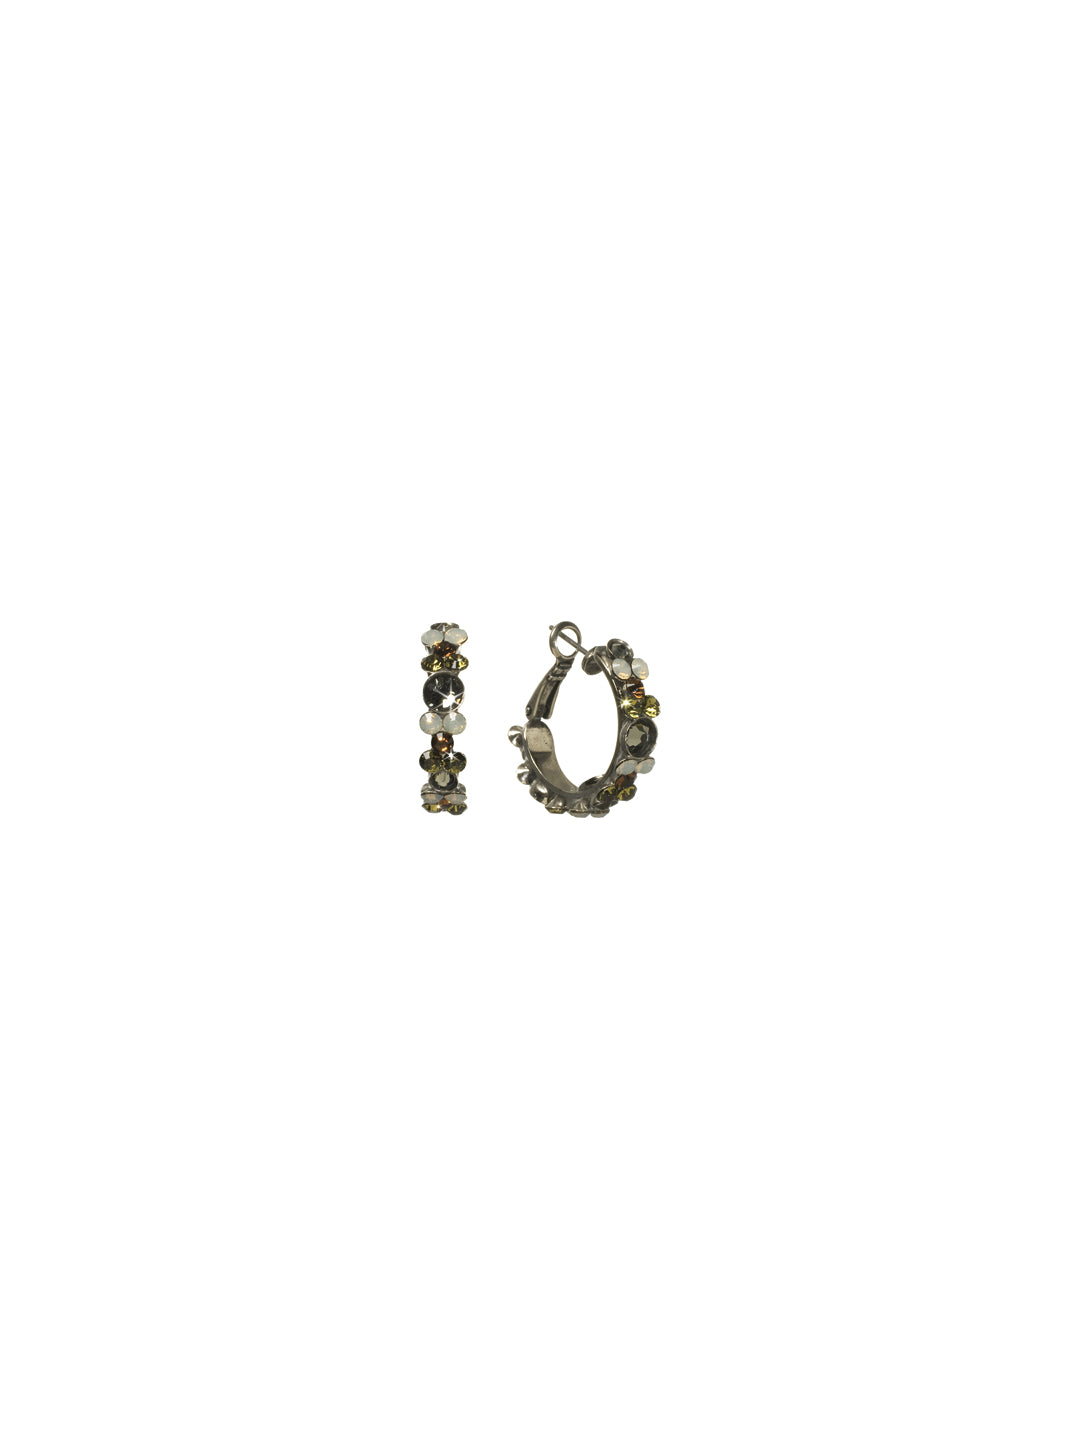 Floral Hoop Earrings - EBP15ASCJ - <p>Intricate design, infused with gorgeous shine. A motif of floral clusters is featured here on a small, delicate hoop with a hinged post backing. From Sorrelli's Concrete Jungle collection in our Antique Silver-tone finish.</p>